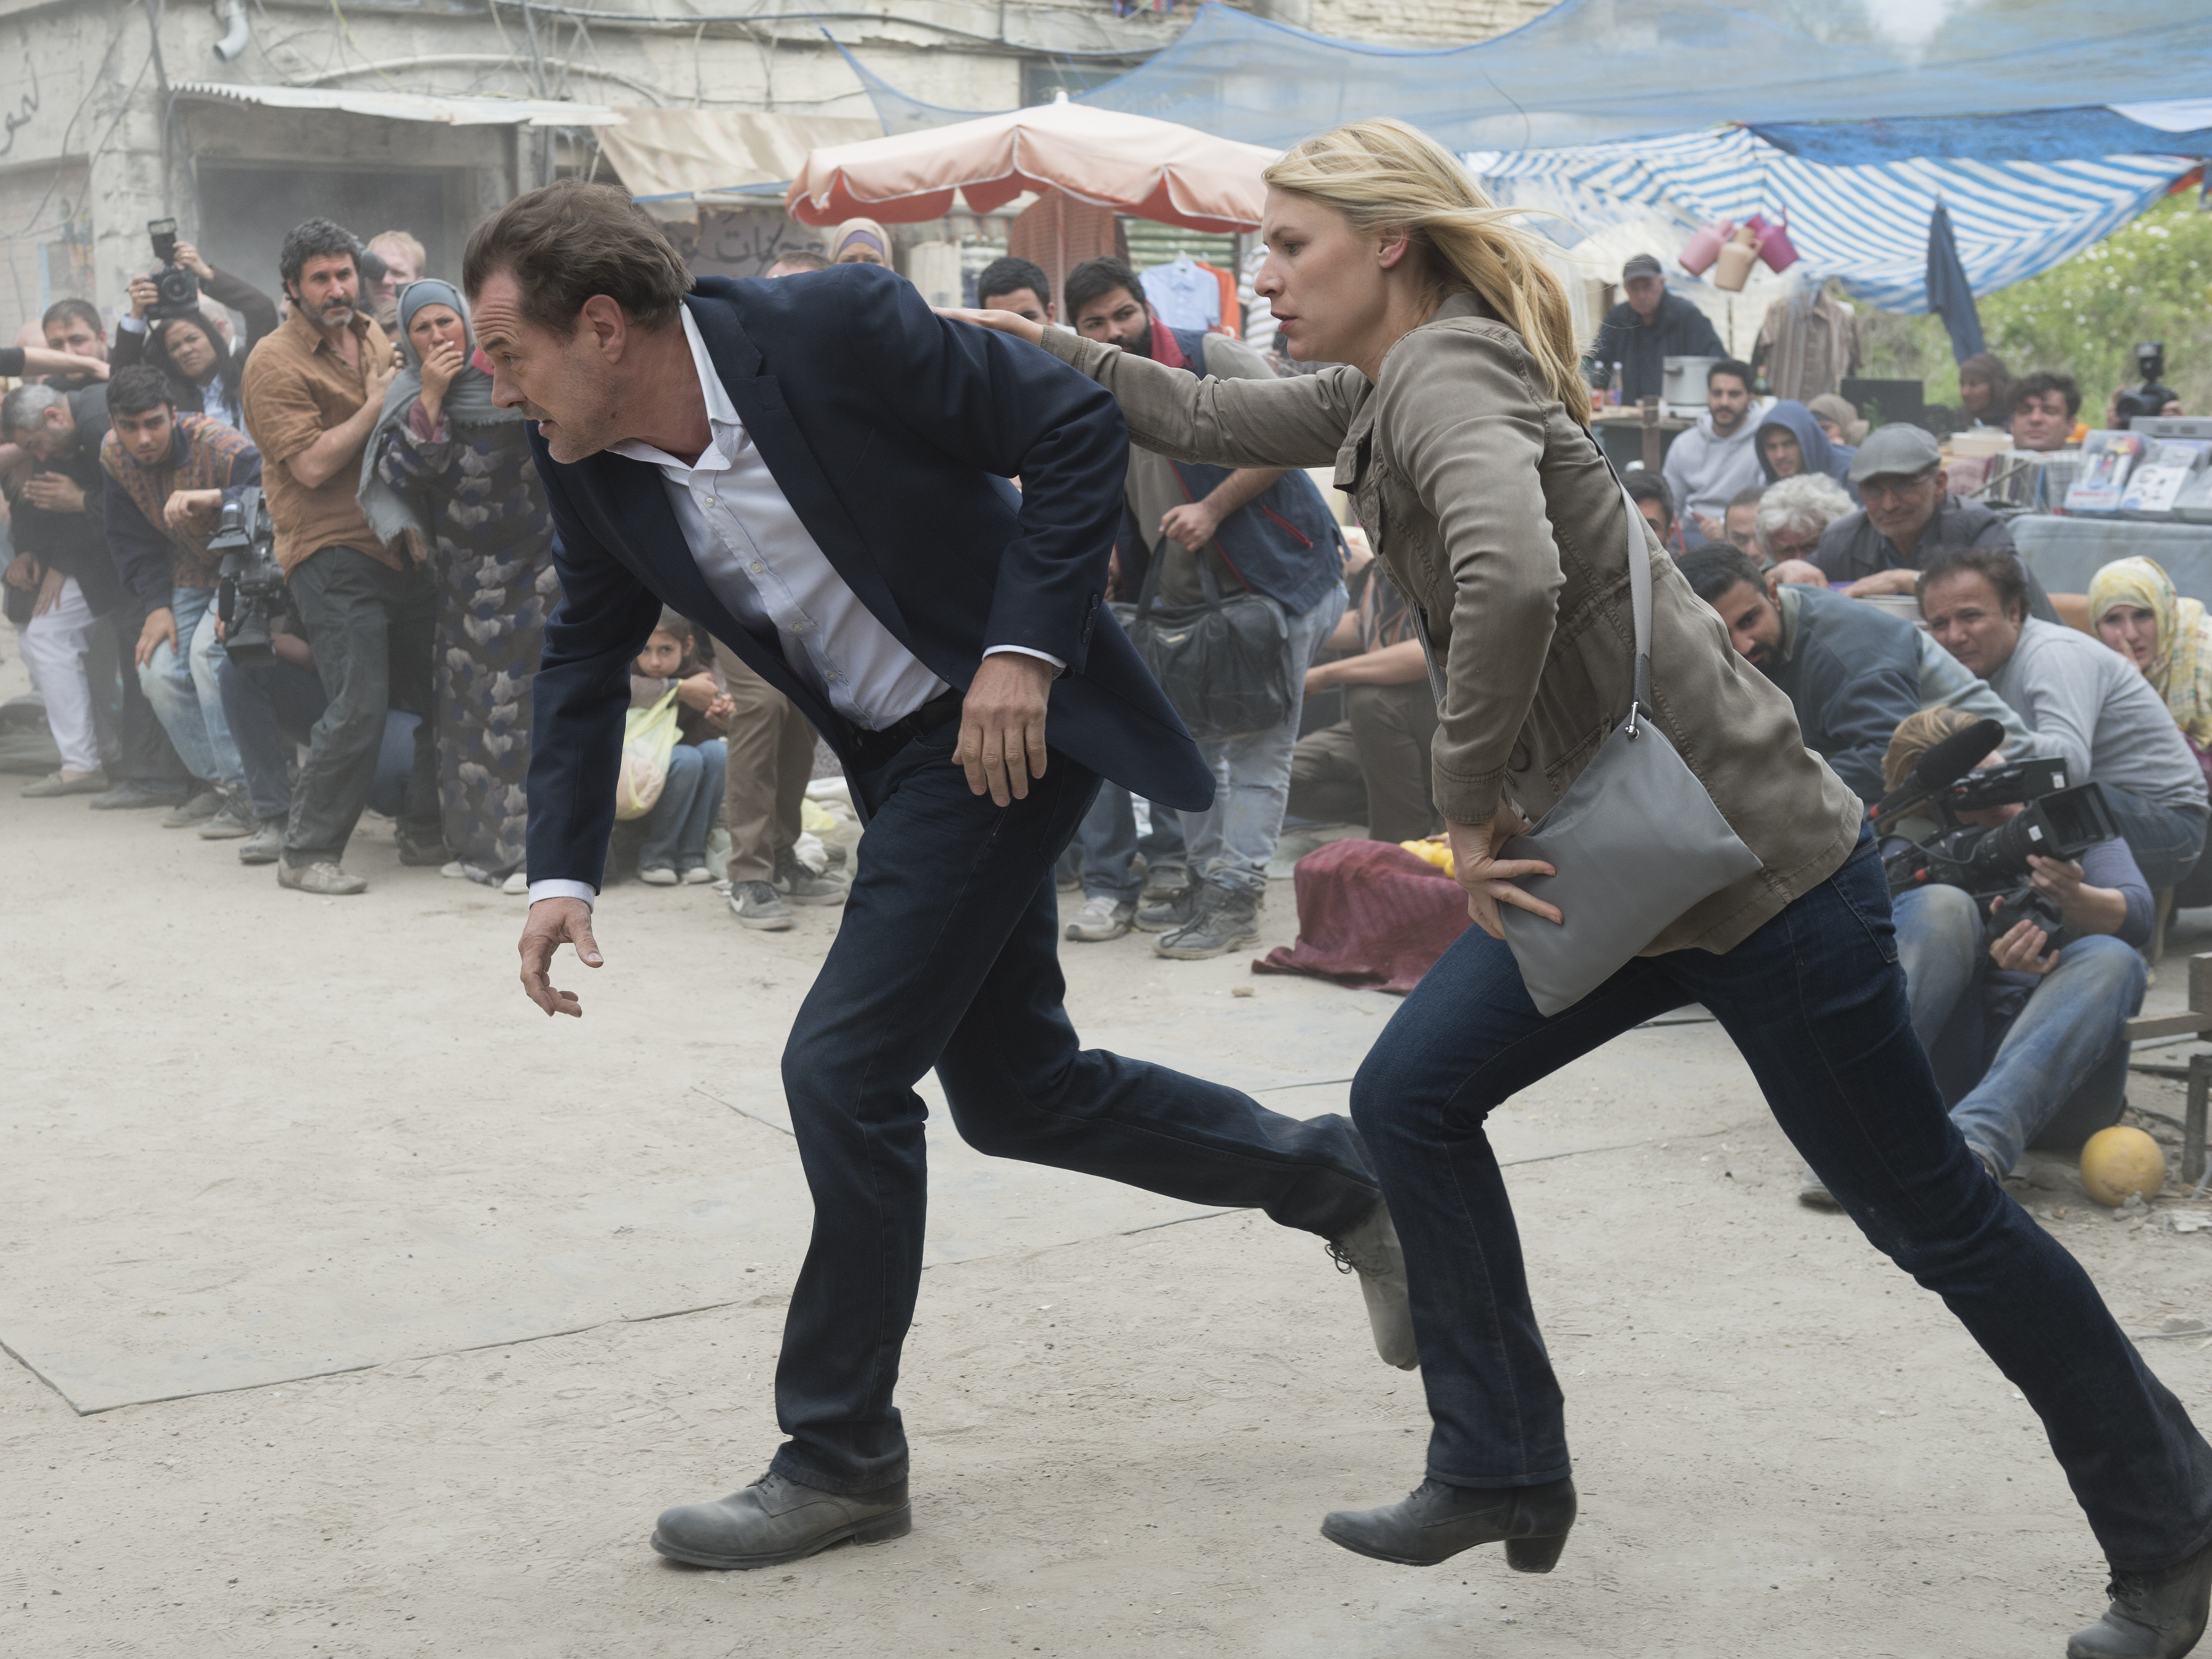 ART OF THE CUT with Showtime's "Homeland" editor, Harvey Rosenstock, ACE 11